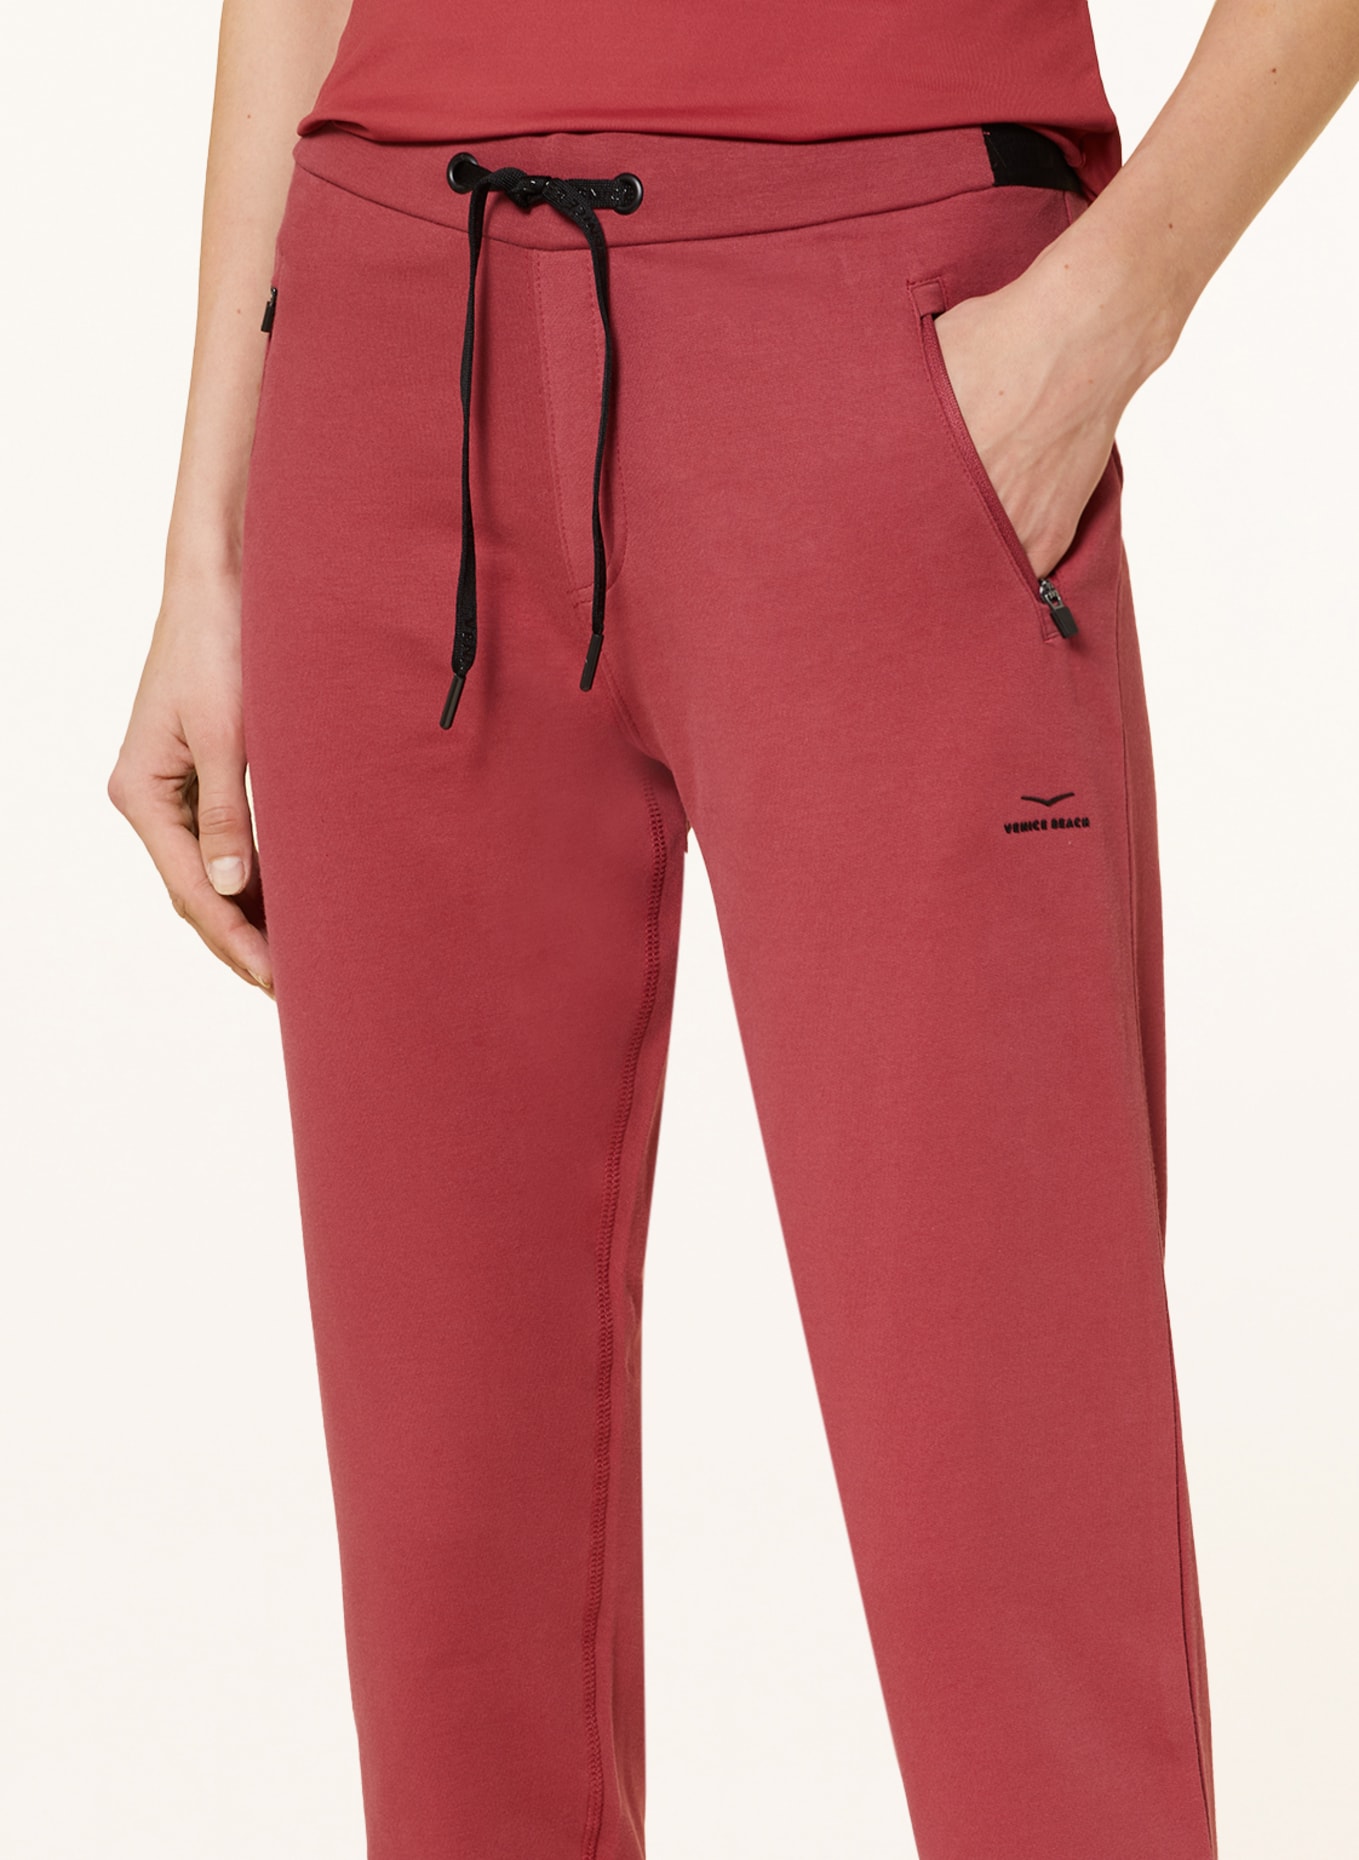 VENICE BEACH Sweatpants SHELLY, Color: LIGHT RED (Image 5)